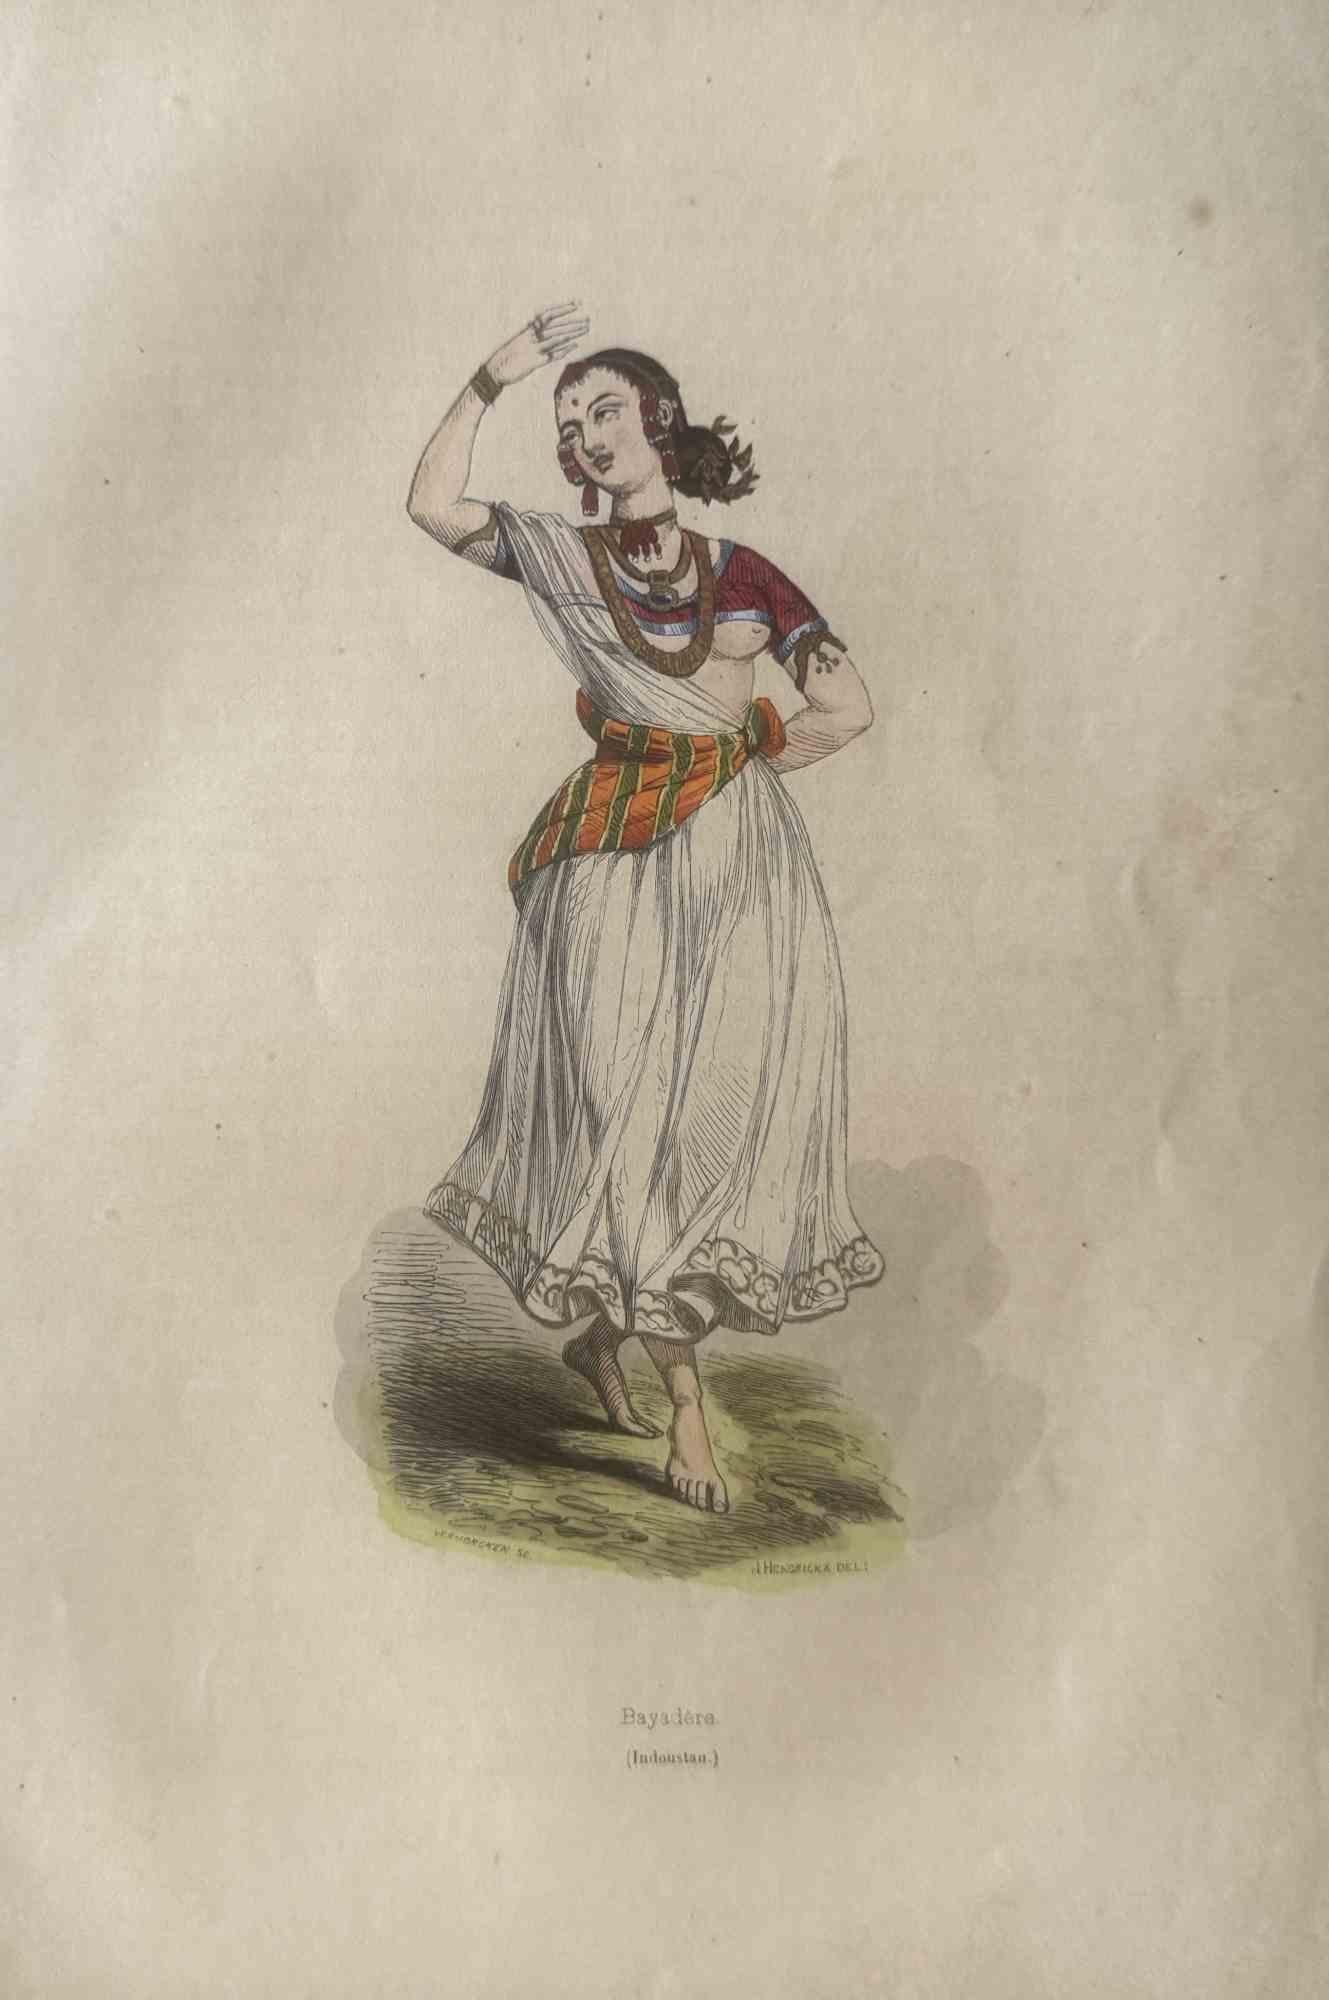 Various Artists Figurative Print - Uses and Customs - Indian Dancer - Lithograph - 1862